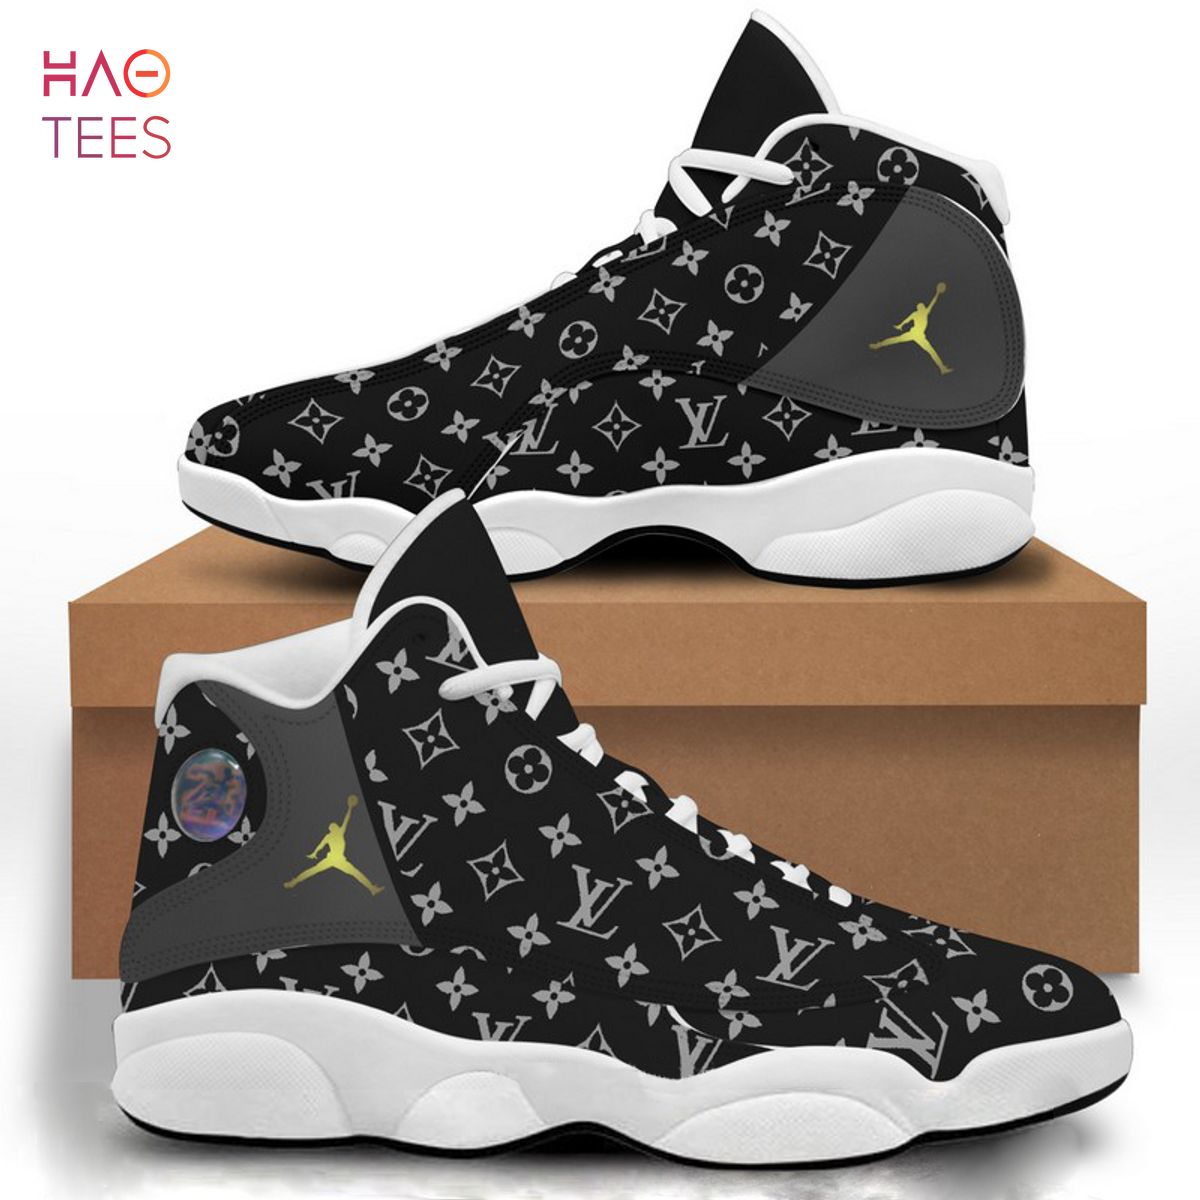 New Louis Vuitton Black Air Jordan 13 Sneakers Shoes Lv Gifts For